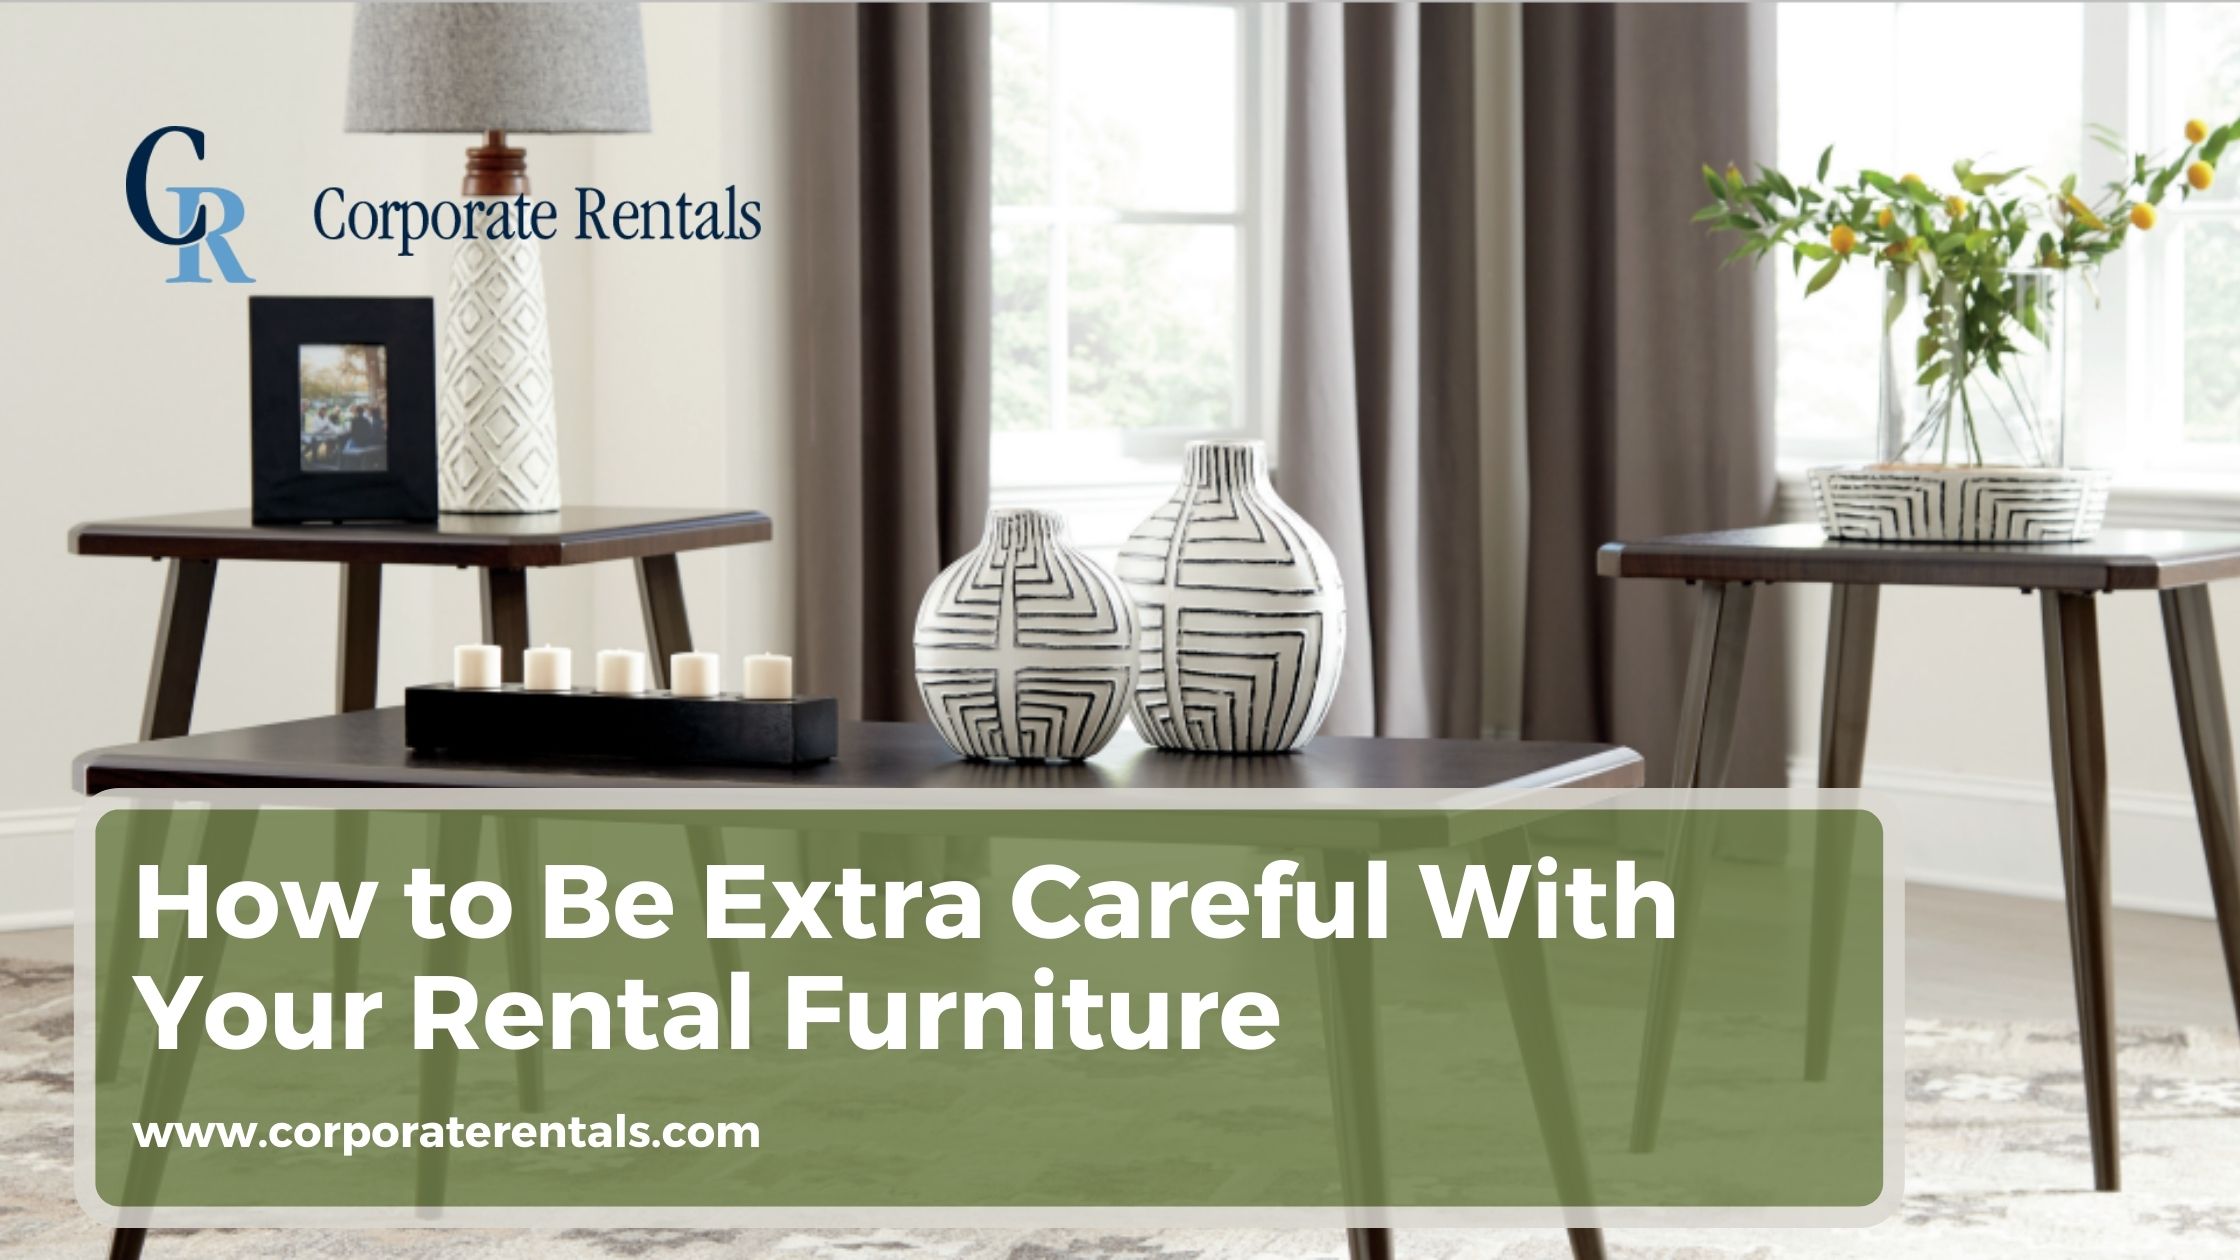 How to Be Extra Careful With Your Rental Furniture